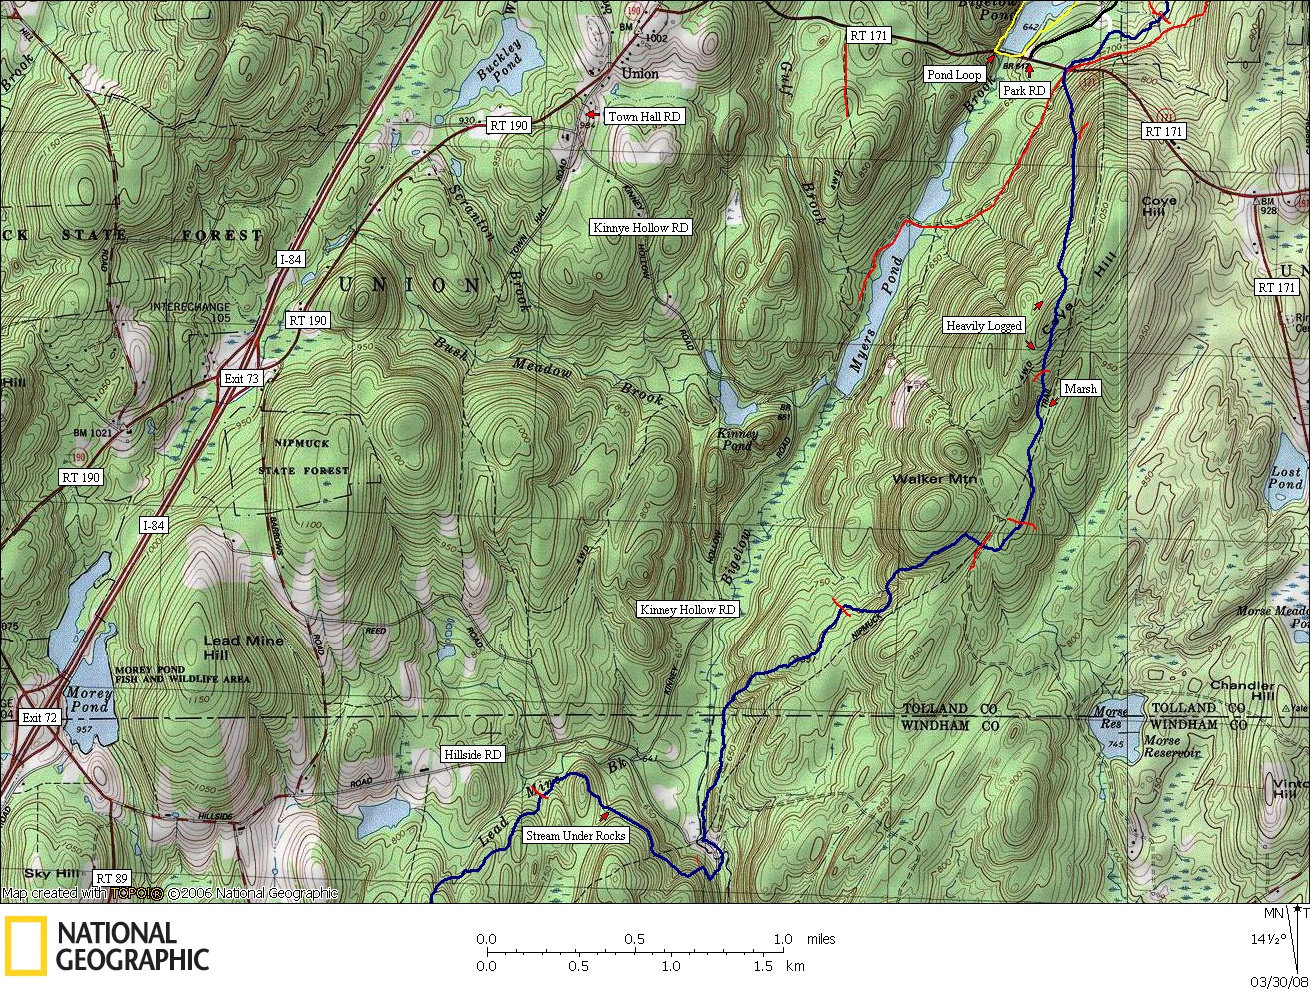 Nipmuck, trail, trails, hike, hiking, map, backpacking, outdoors, camping, Yale, Forest